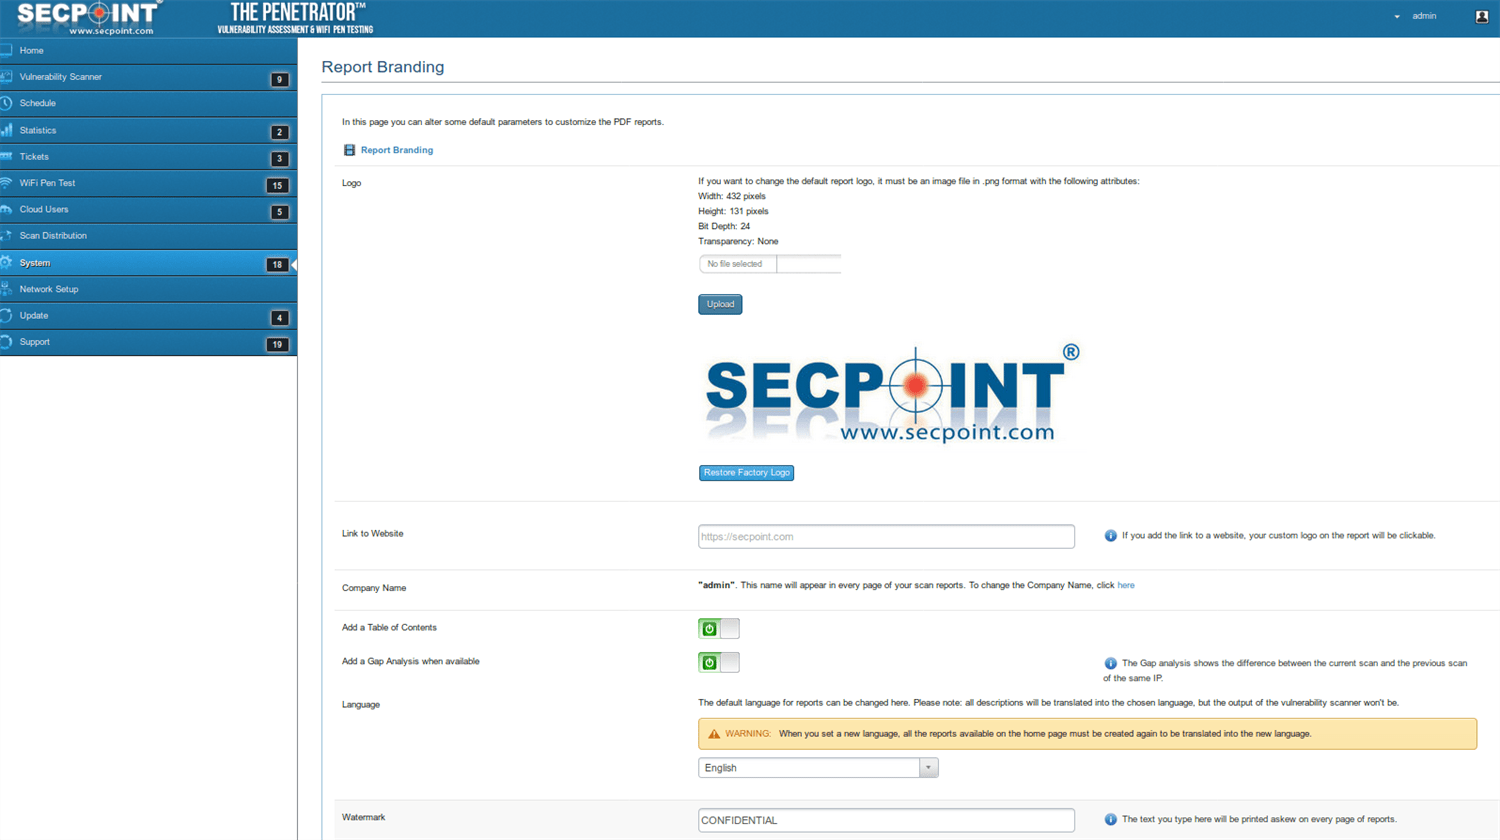 SecPoint Penetrator S9 - 32 IP Concurrent Scan License Vuln Scanning Appliance SFF (1 Year License) - SecPoint